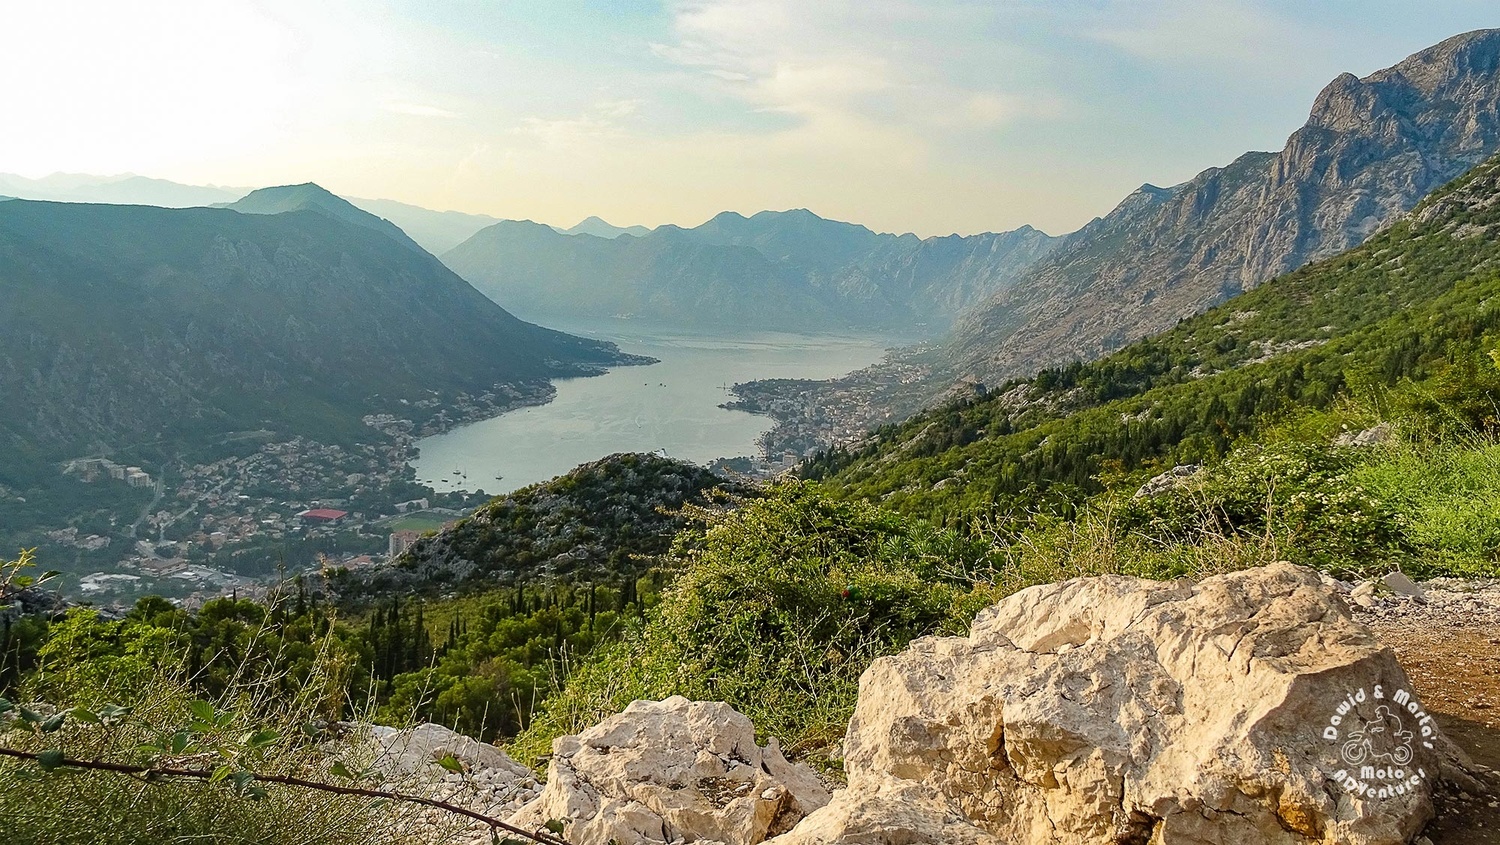 The Kotor Bay seen from the Kotor serpentines